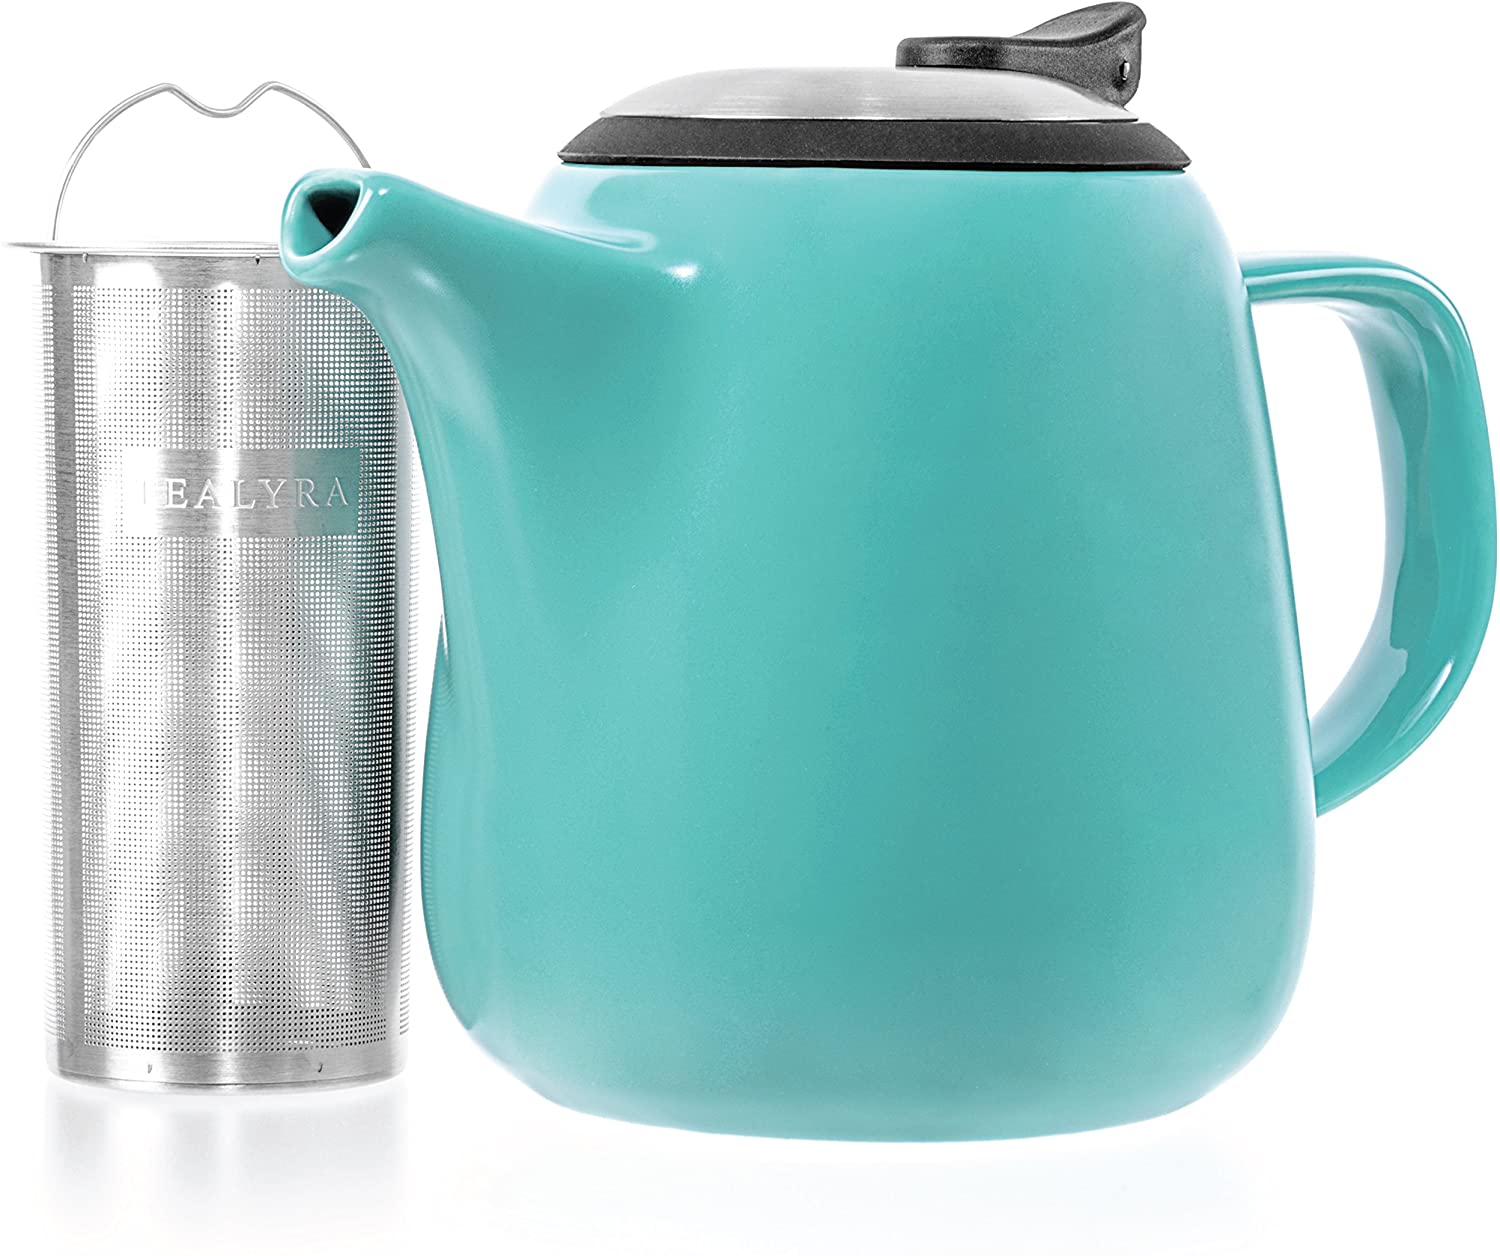 Tealyra - Daze Ceramic Teapot Turquoise - 800ml (2-3 Cups) - Small Stylish Ceramic Teapot with Stainless Steel Lid - Extra-Fine Infuser to Brew Loose Leaf Tea